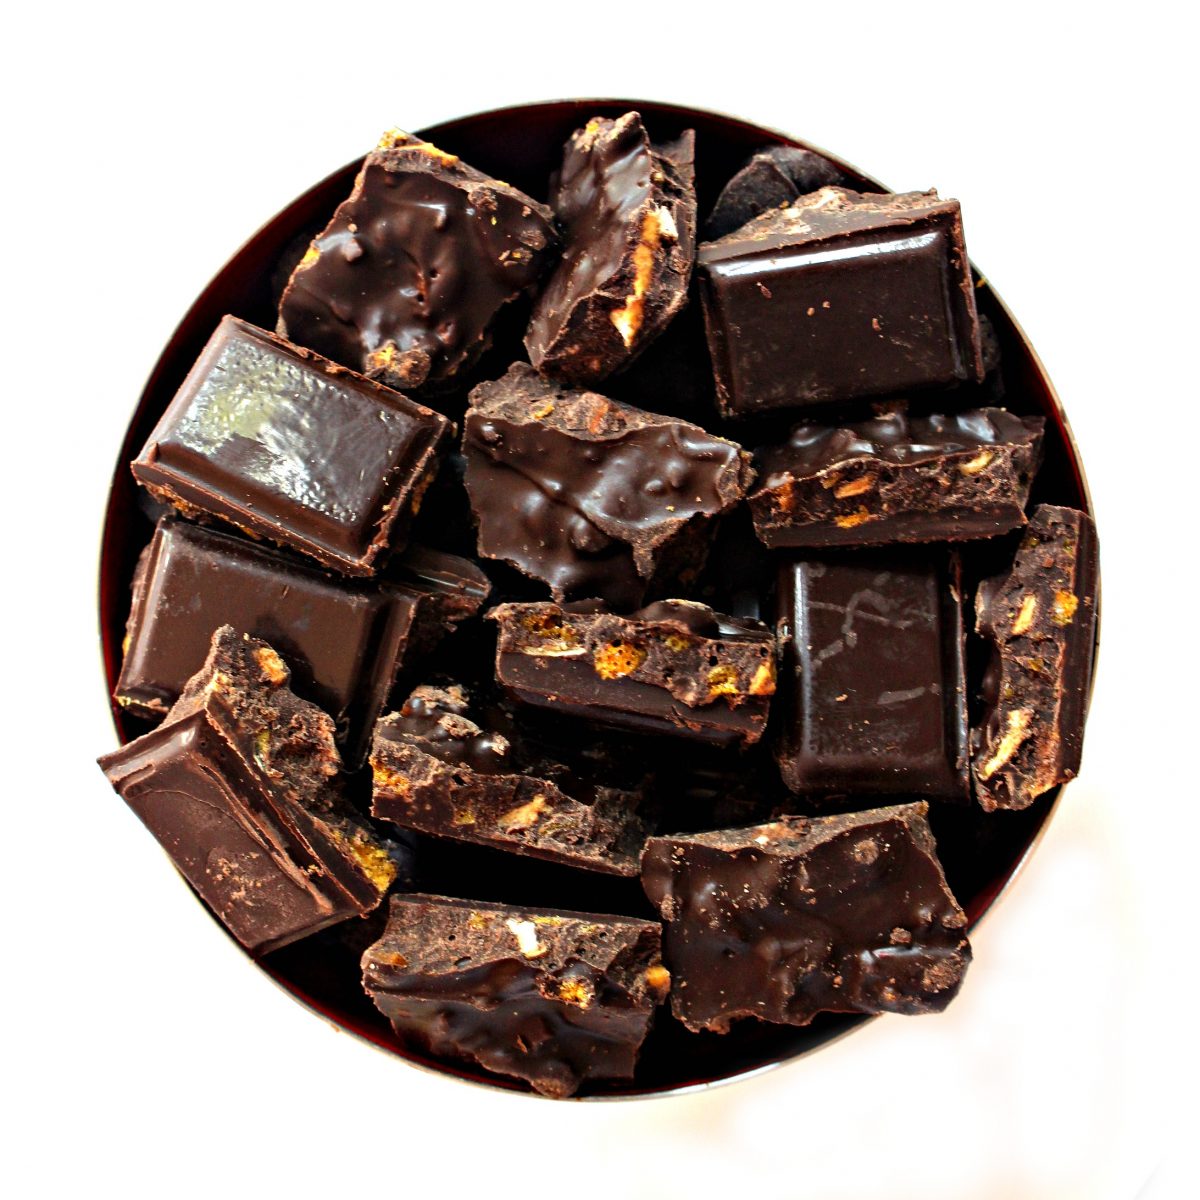 Overhead photo of chocolate bar pieces in a bowl, showing bits of apple and honeycomb inside.